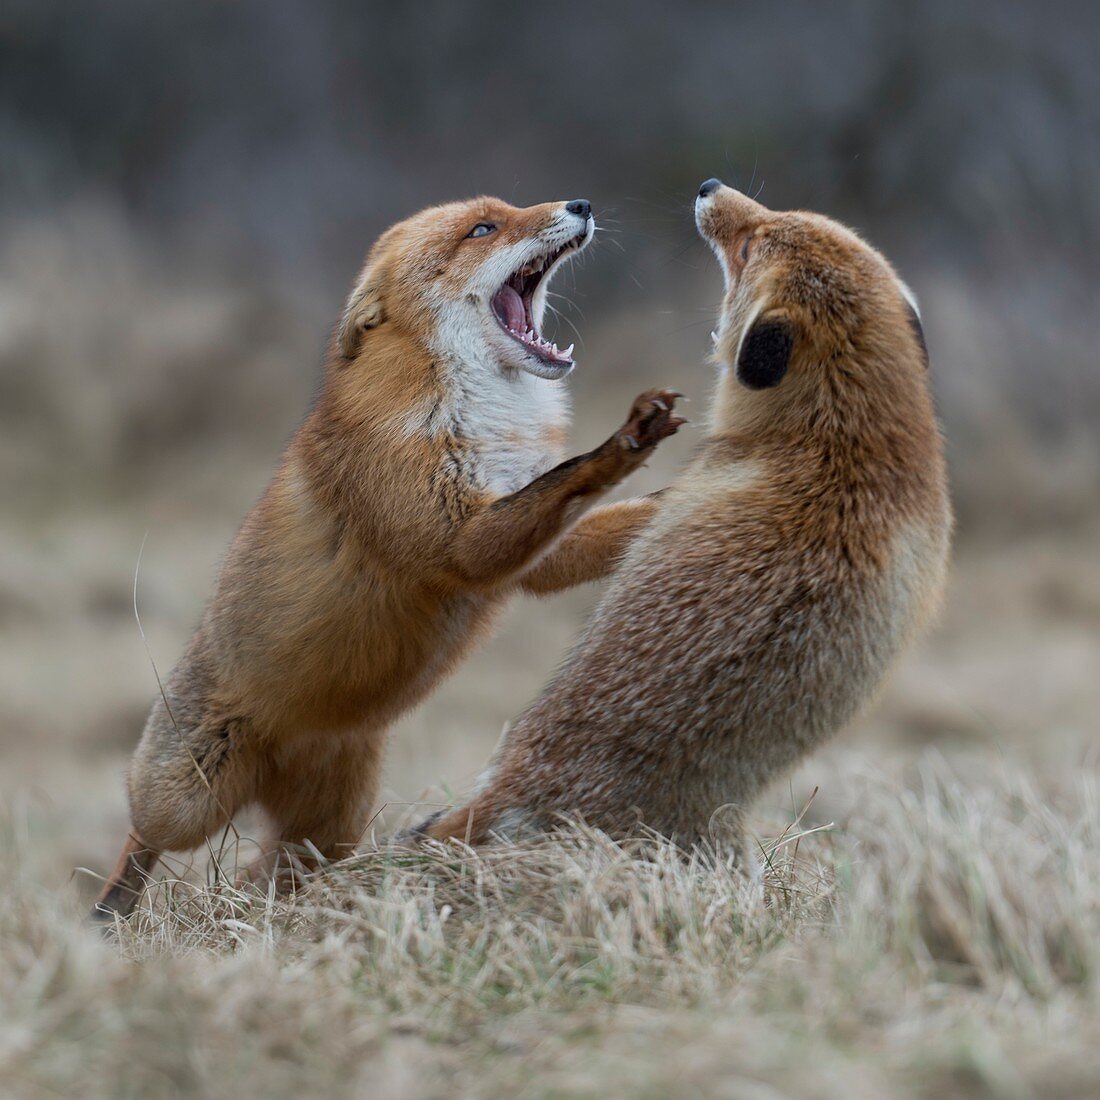 Red Fox / Rotfuchs ( Vulpes vulpes ), two adults, standing on hind legs, threatening each other with wide open jaws, territorial behavoir during rut, wildlife, Europe.